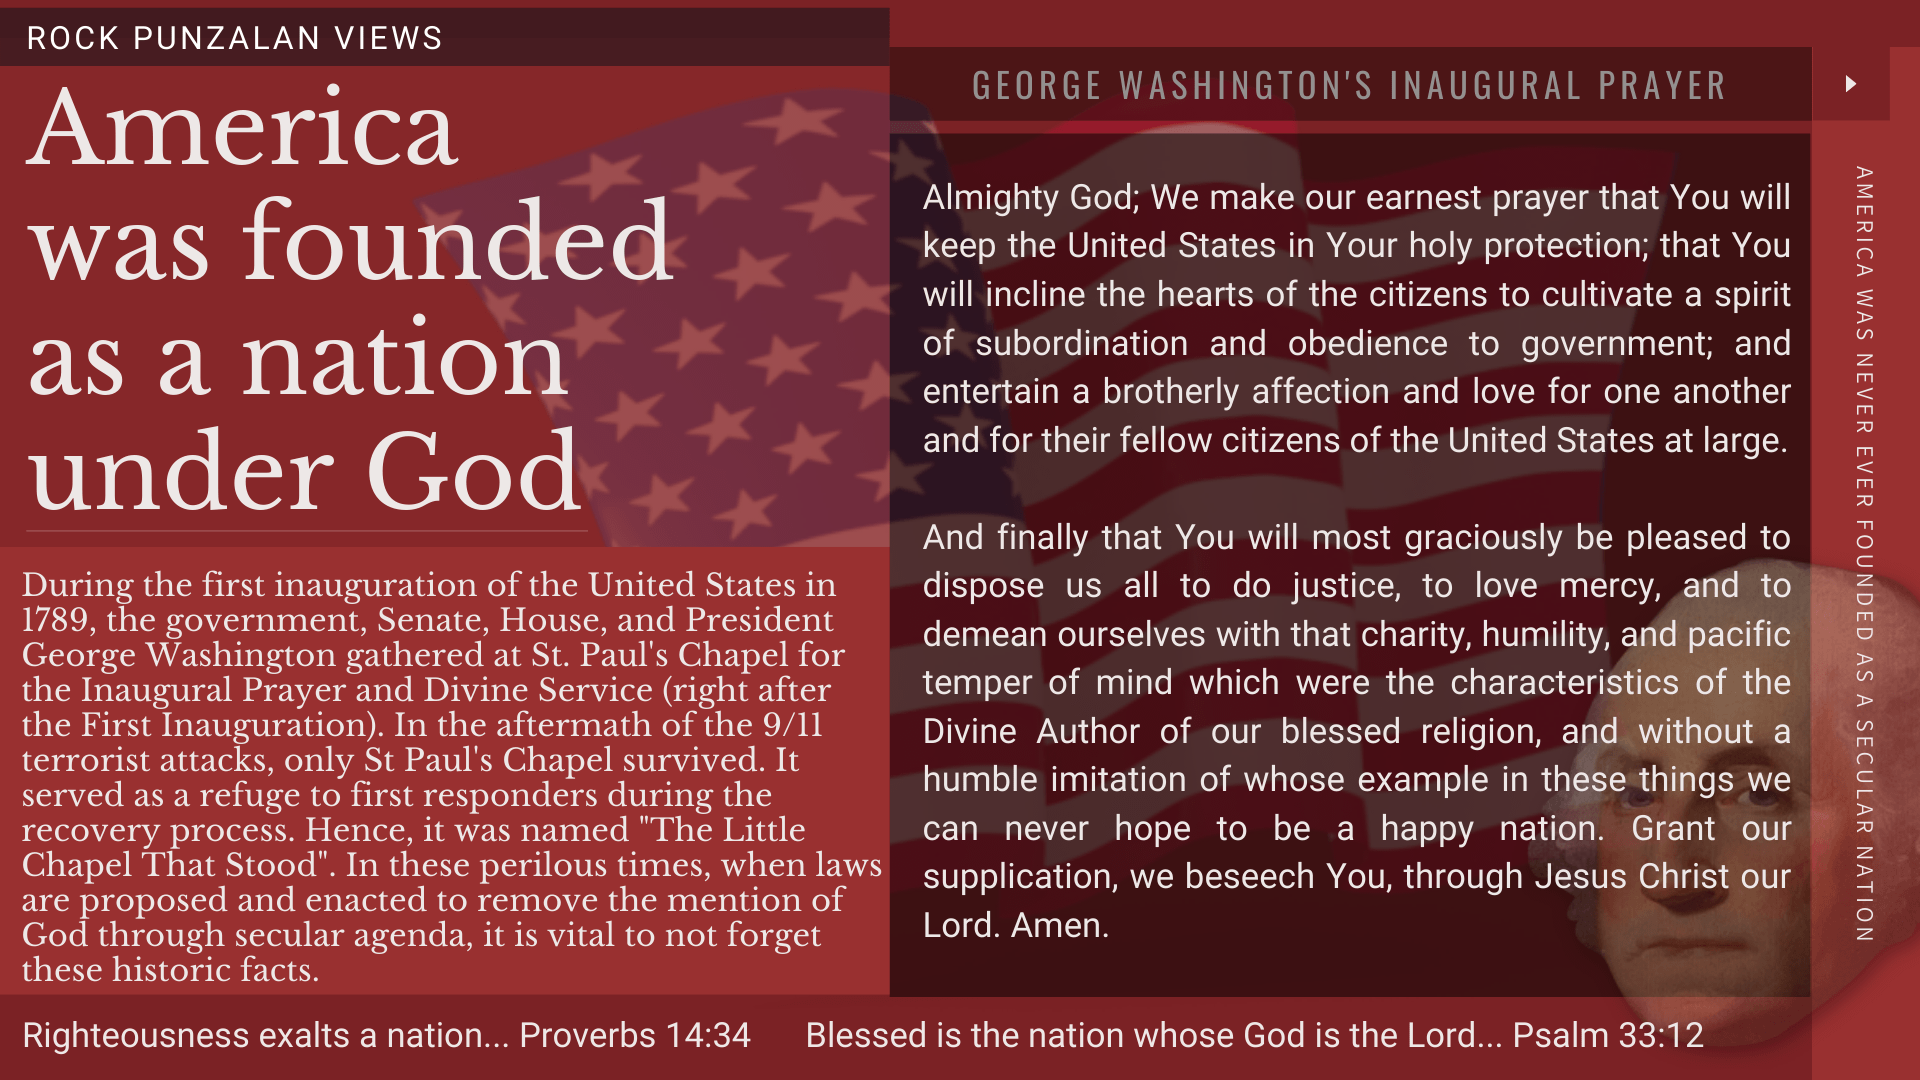 America was founded as a nation under God